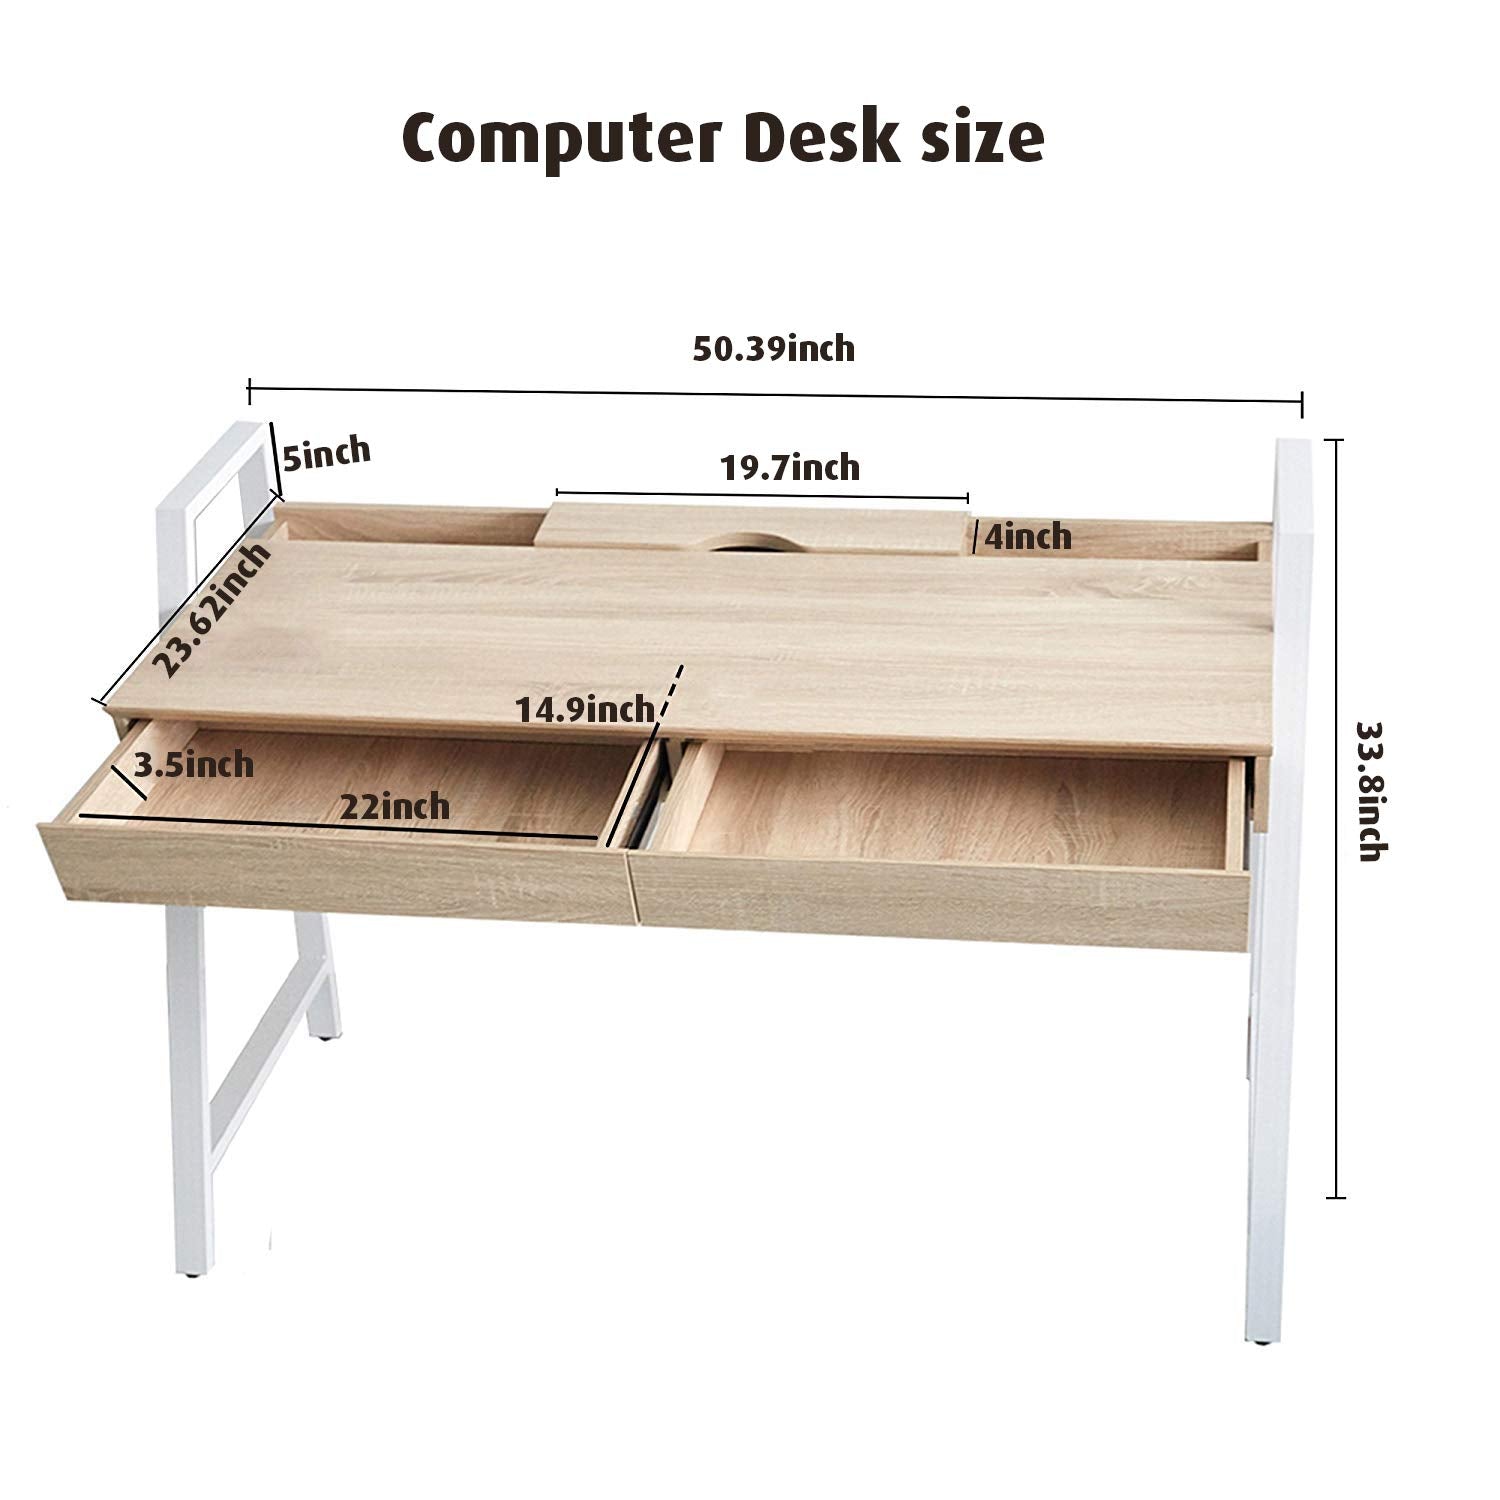 Bosonshop Wood Computer Desk Computer Table Writing Desk Workstation Study Home Office Furniture with Two Drawers,White